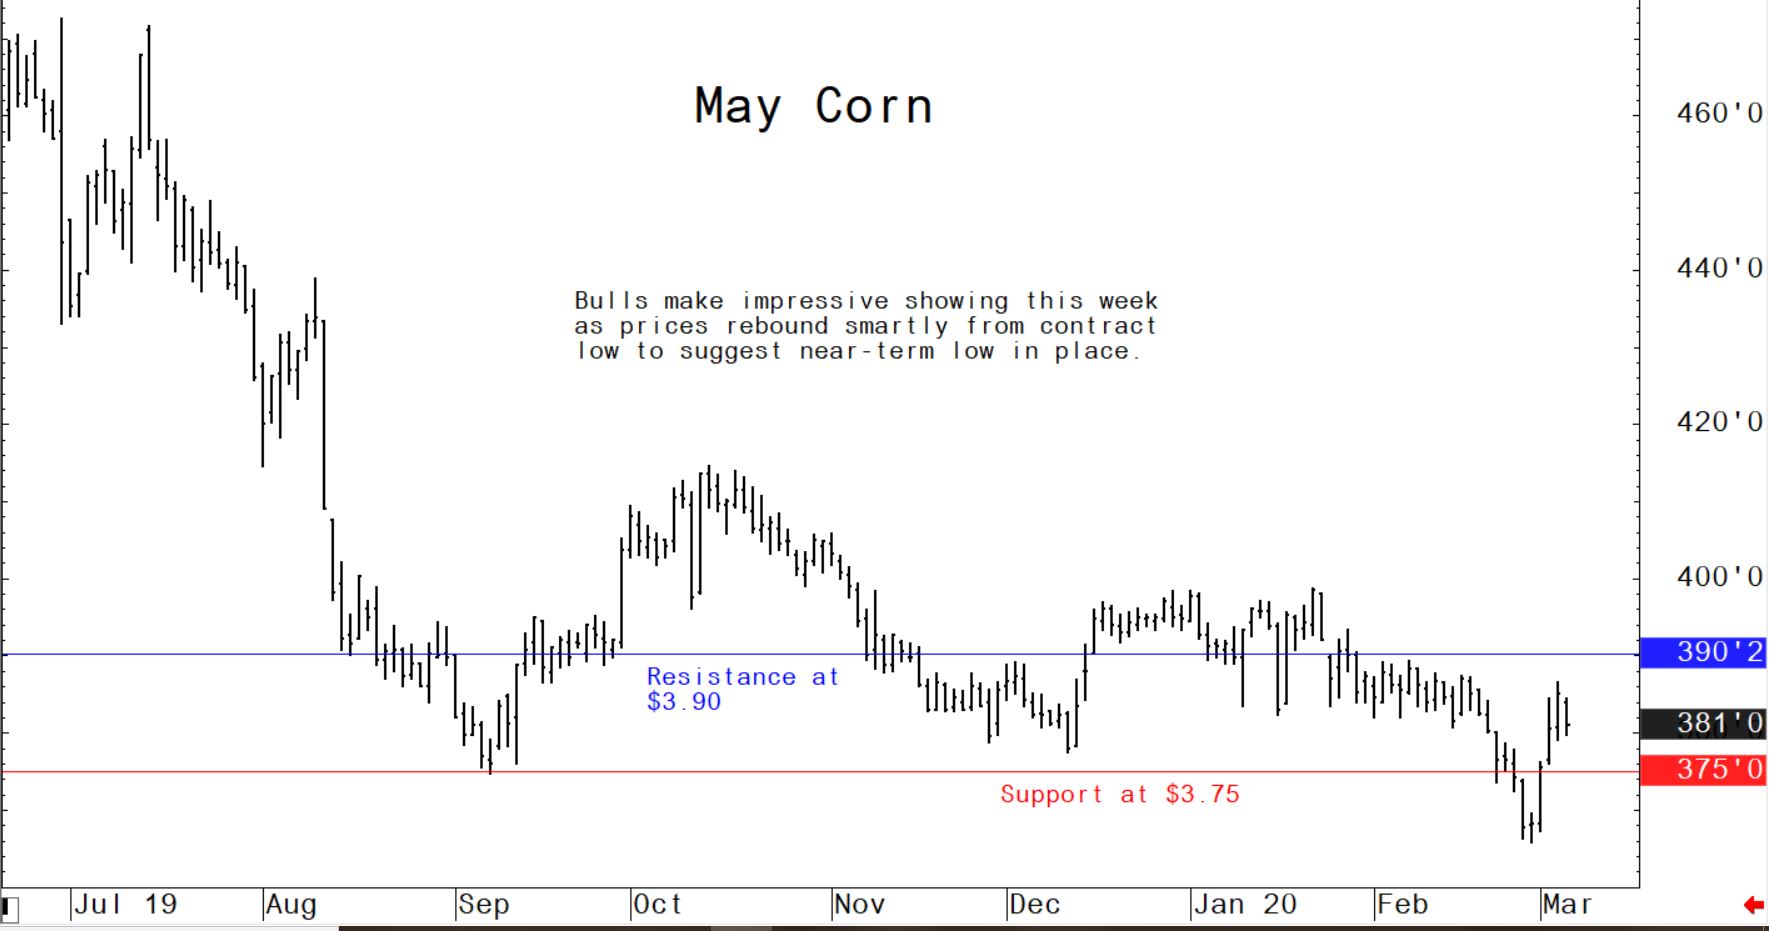 Bulls make impressive showing this week as prices rebound smartly from contract low to suggest near-term low in place